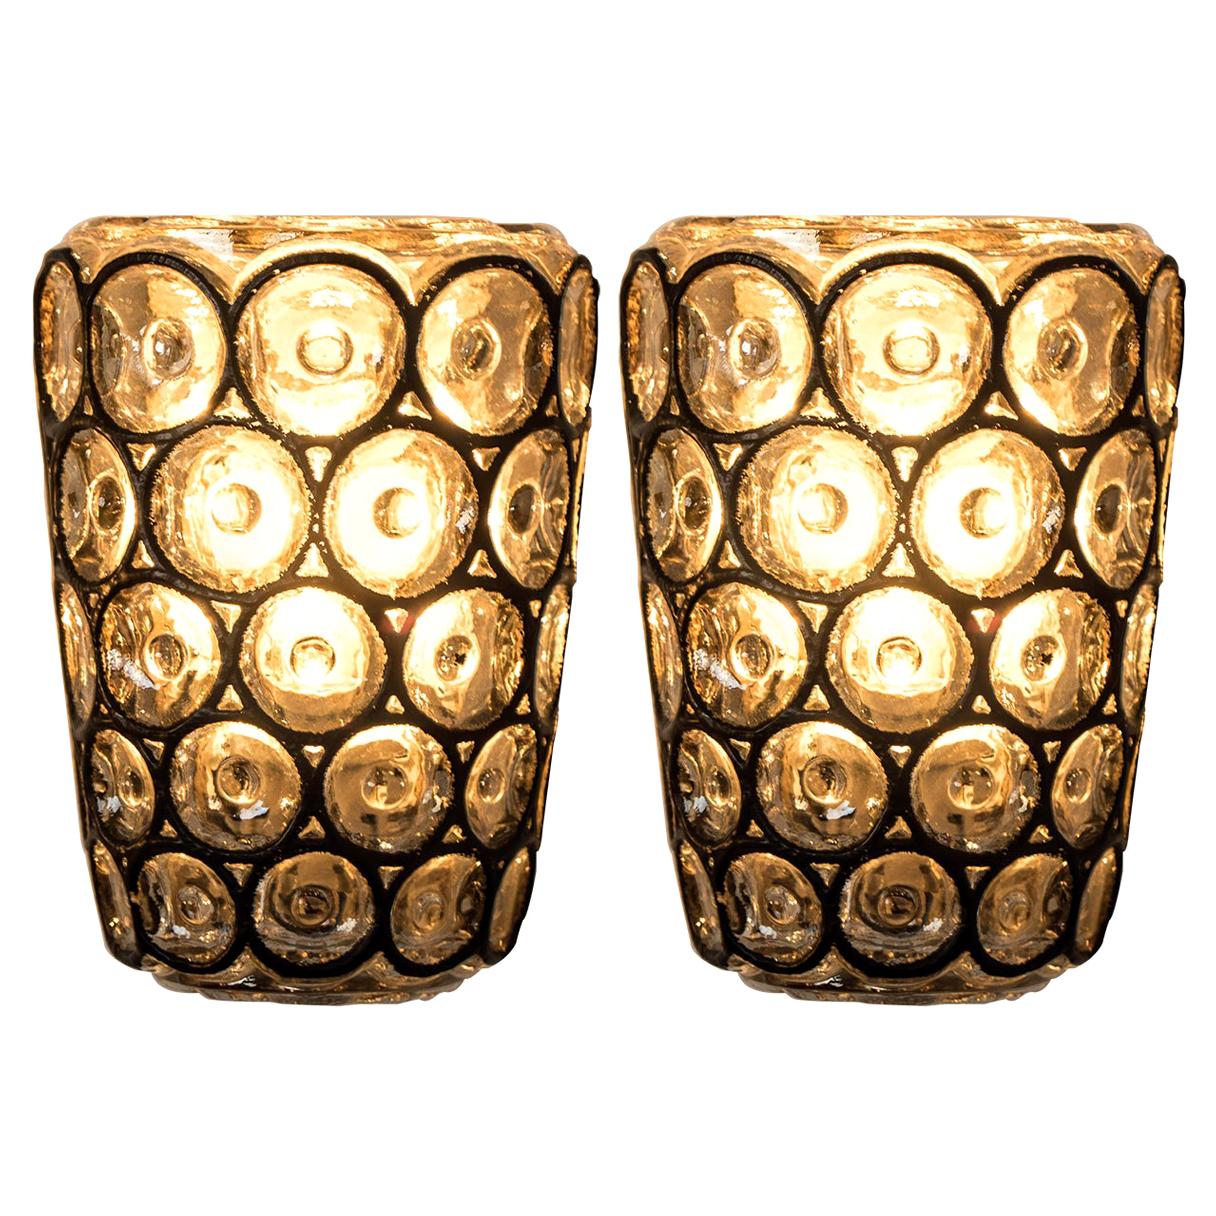 This beautiful and unique pair of hand blown glass wall lights were manufactured by Glashütte Limburg in Germany during the 1960s, (late 1960s or early 1970s). Beautiful craftsmanship. These midcentury vintage lights feature handmade heavy blown